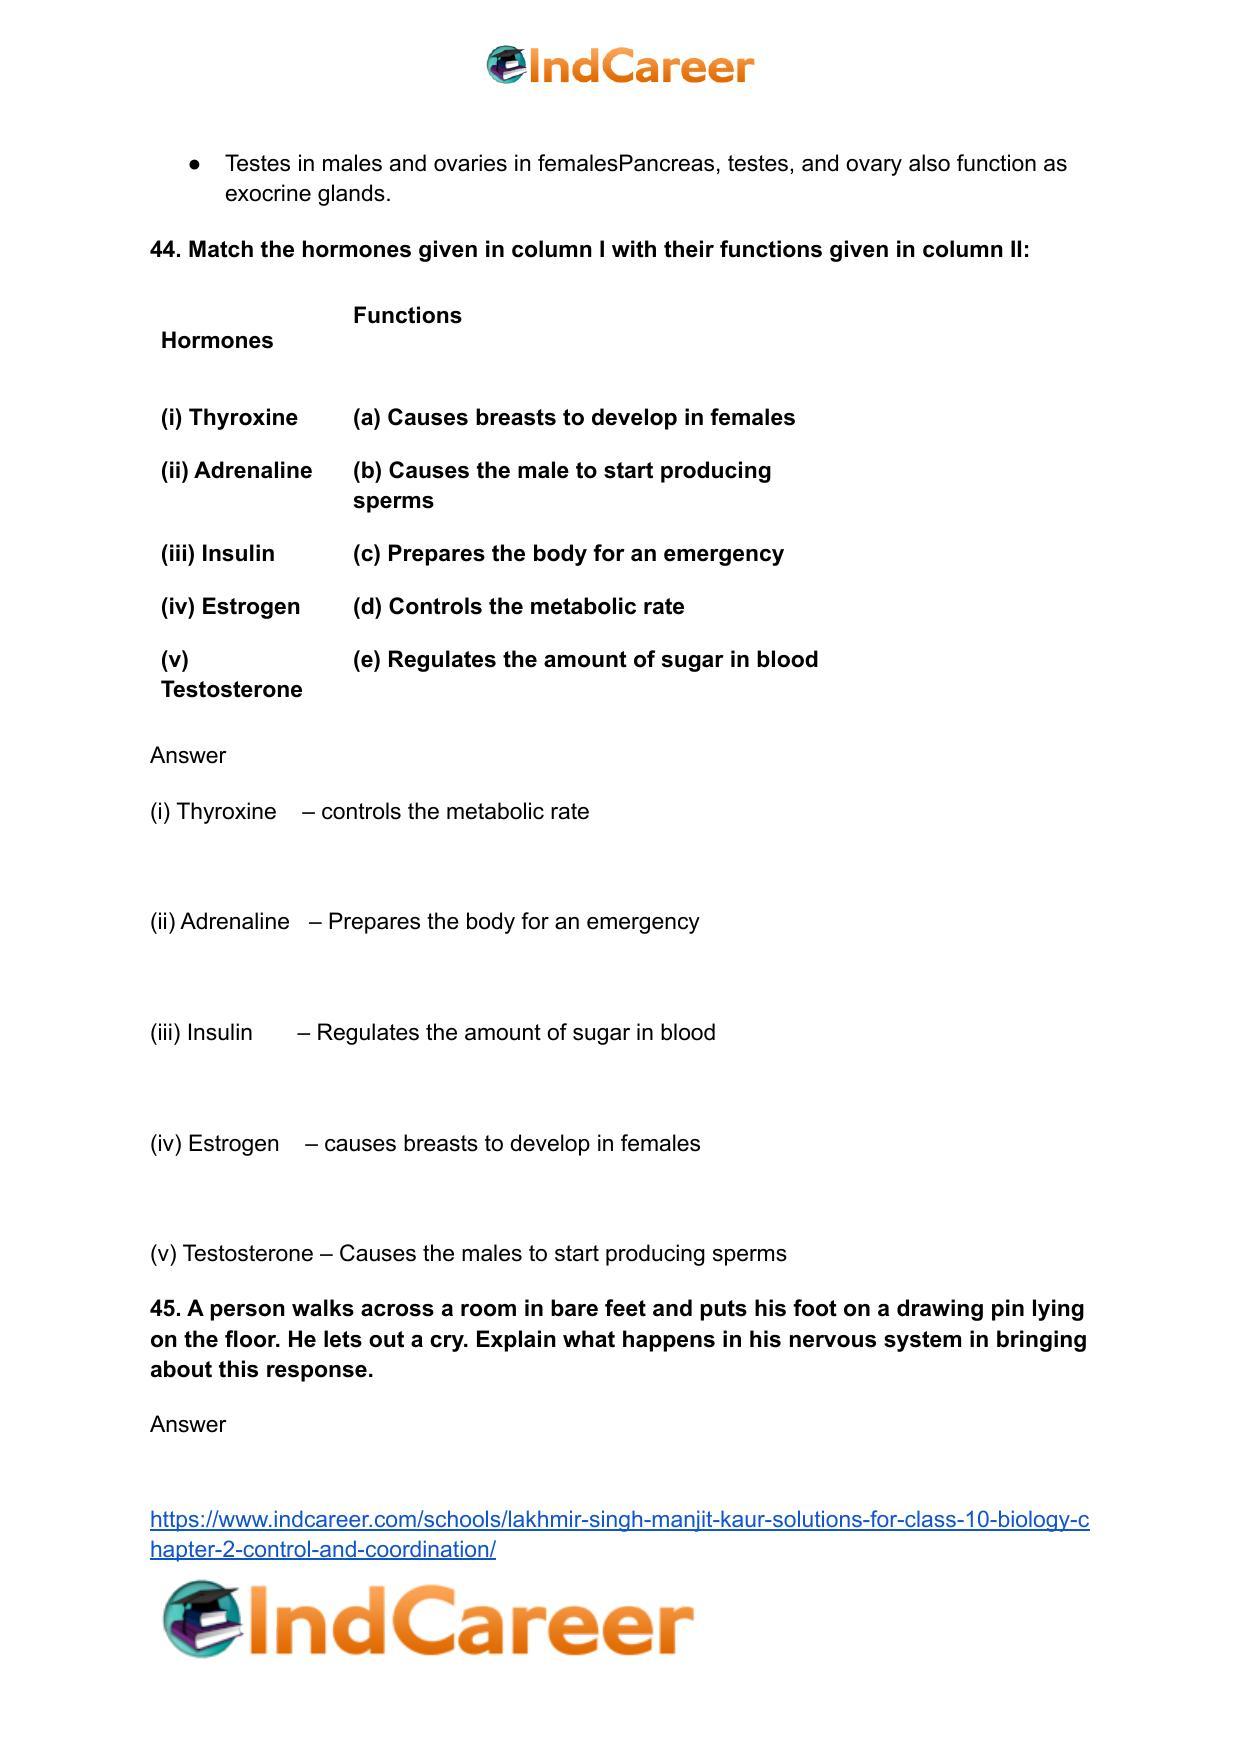 Lakhmir Singh Manjit Kaur  Solutions for Class 10 Biology: Chapter 2- Control And Coordination - Page 39